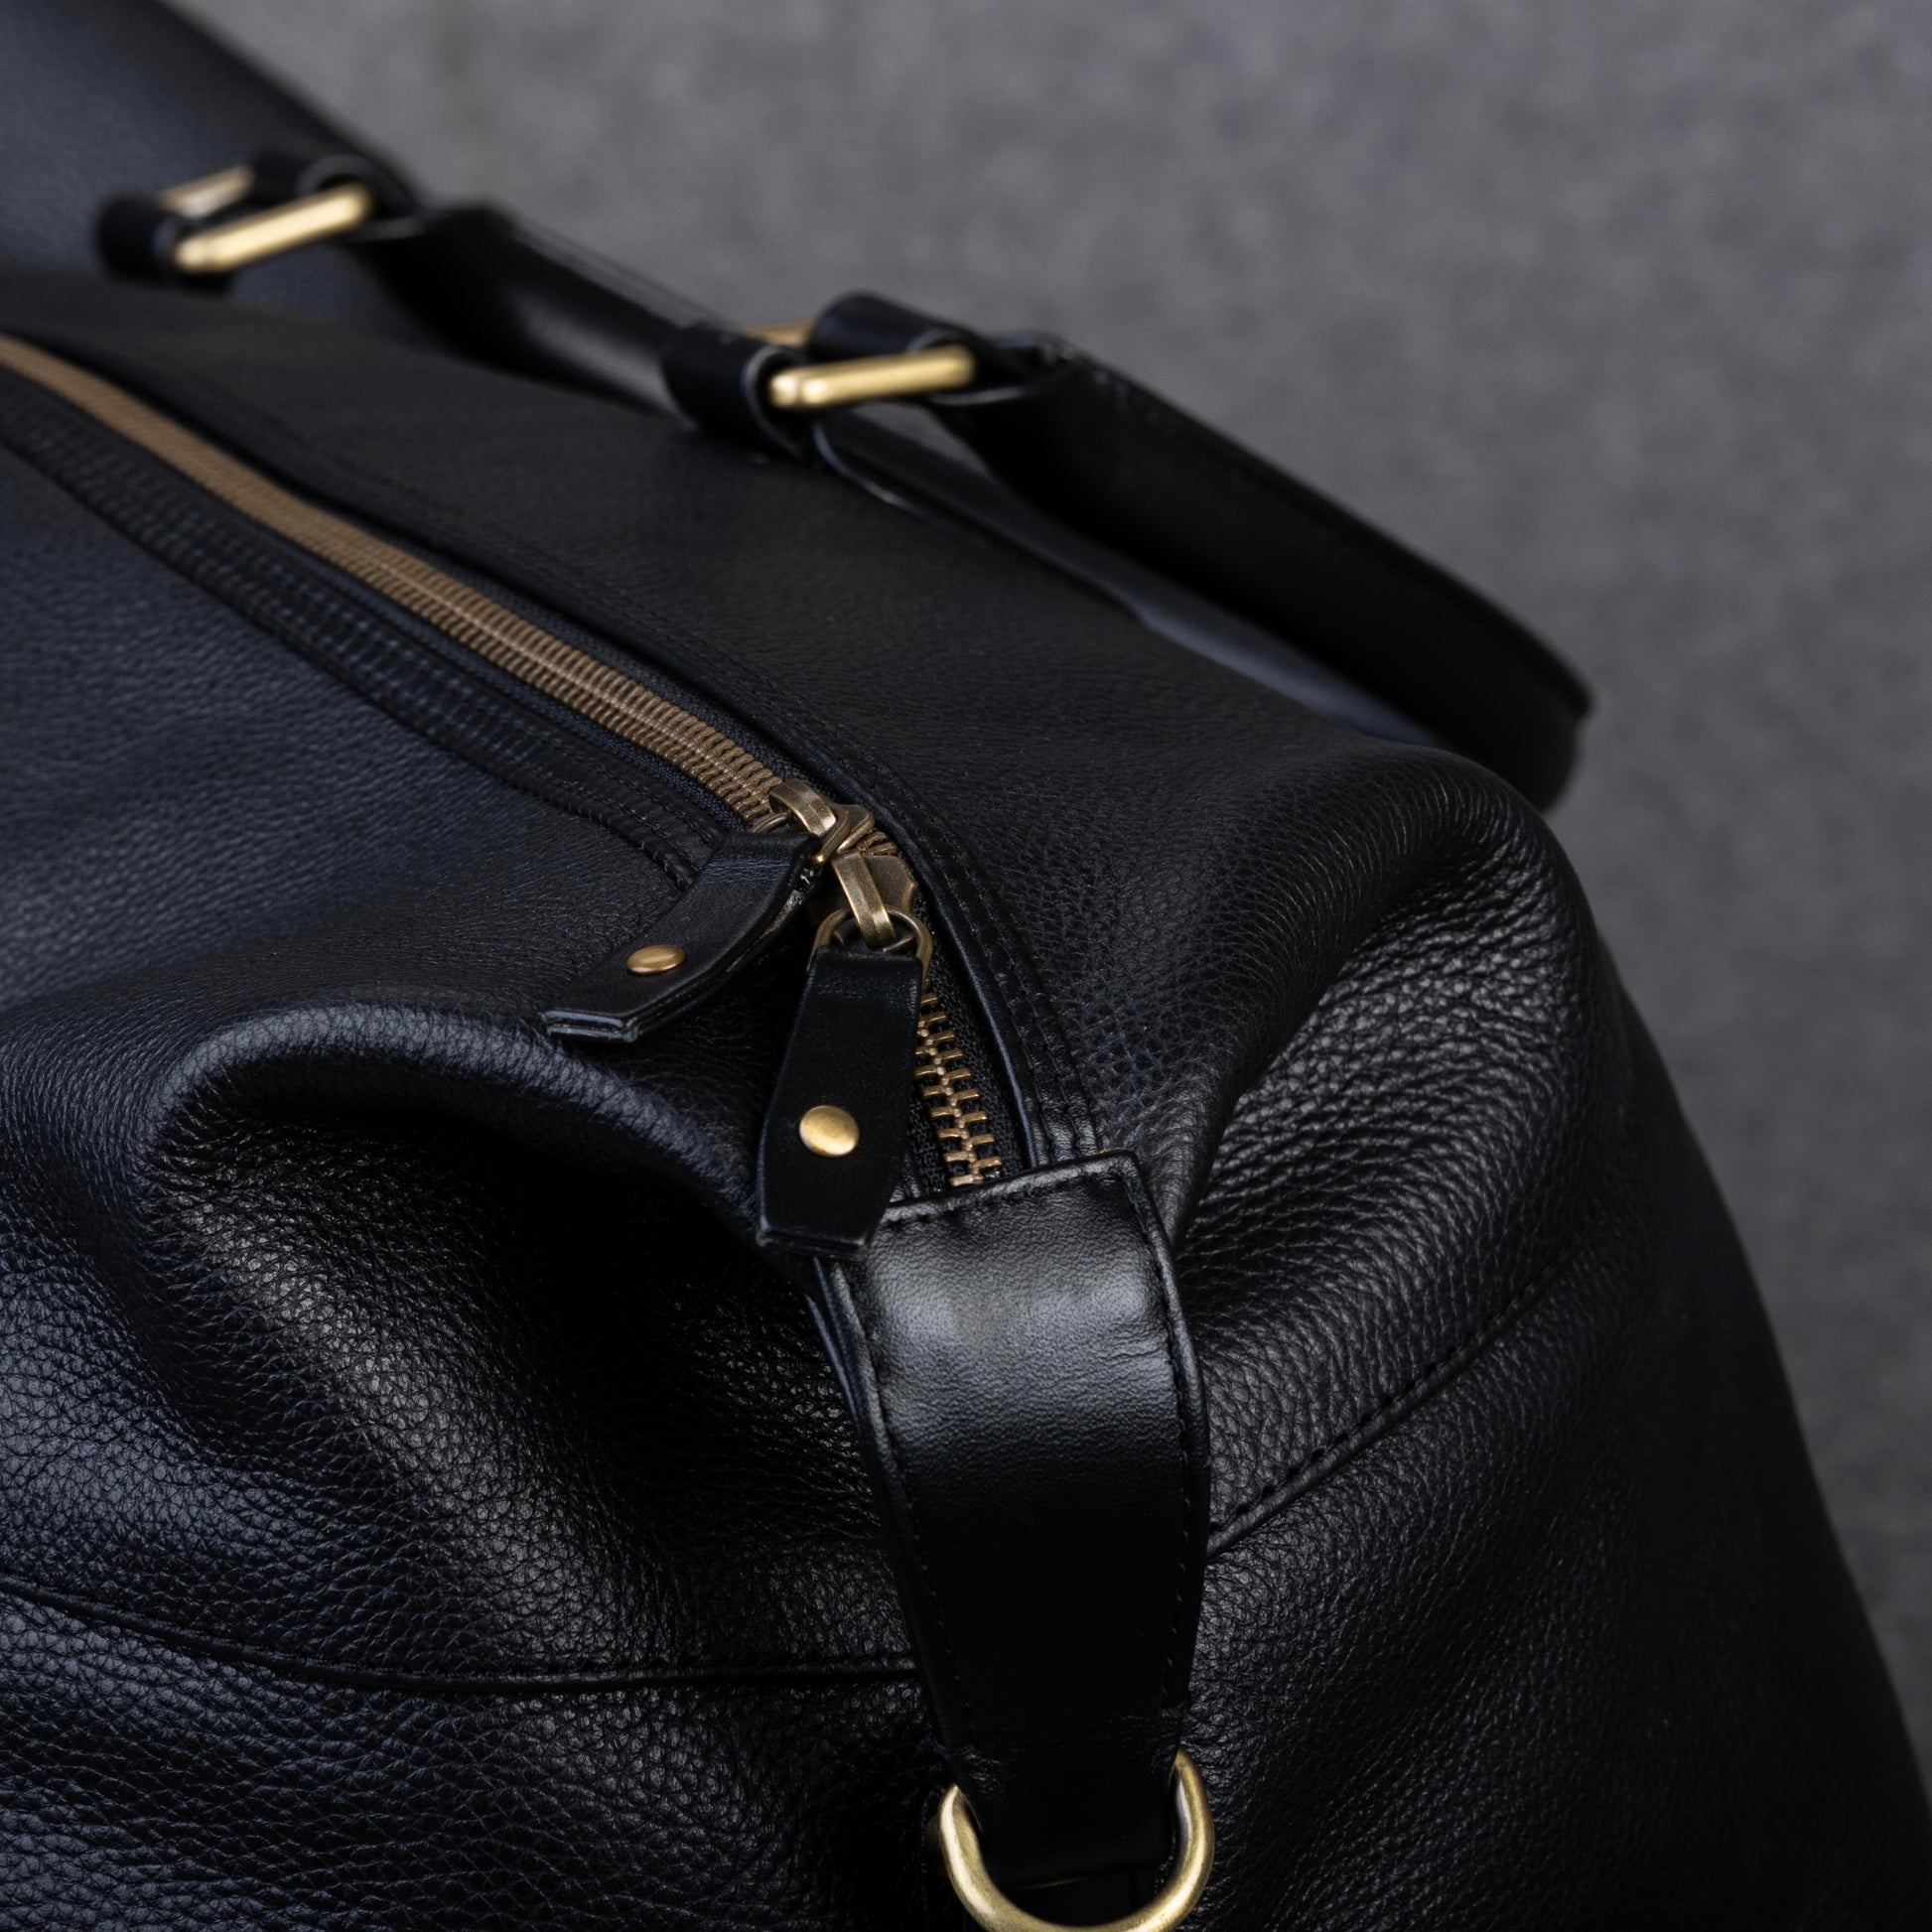 The Duffel Bag has a Top Zip Closure. Zippers used are YKK